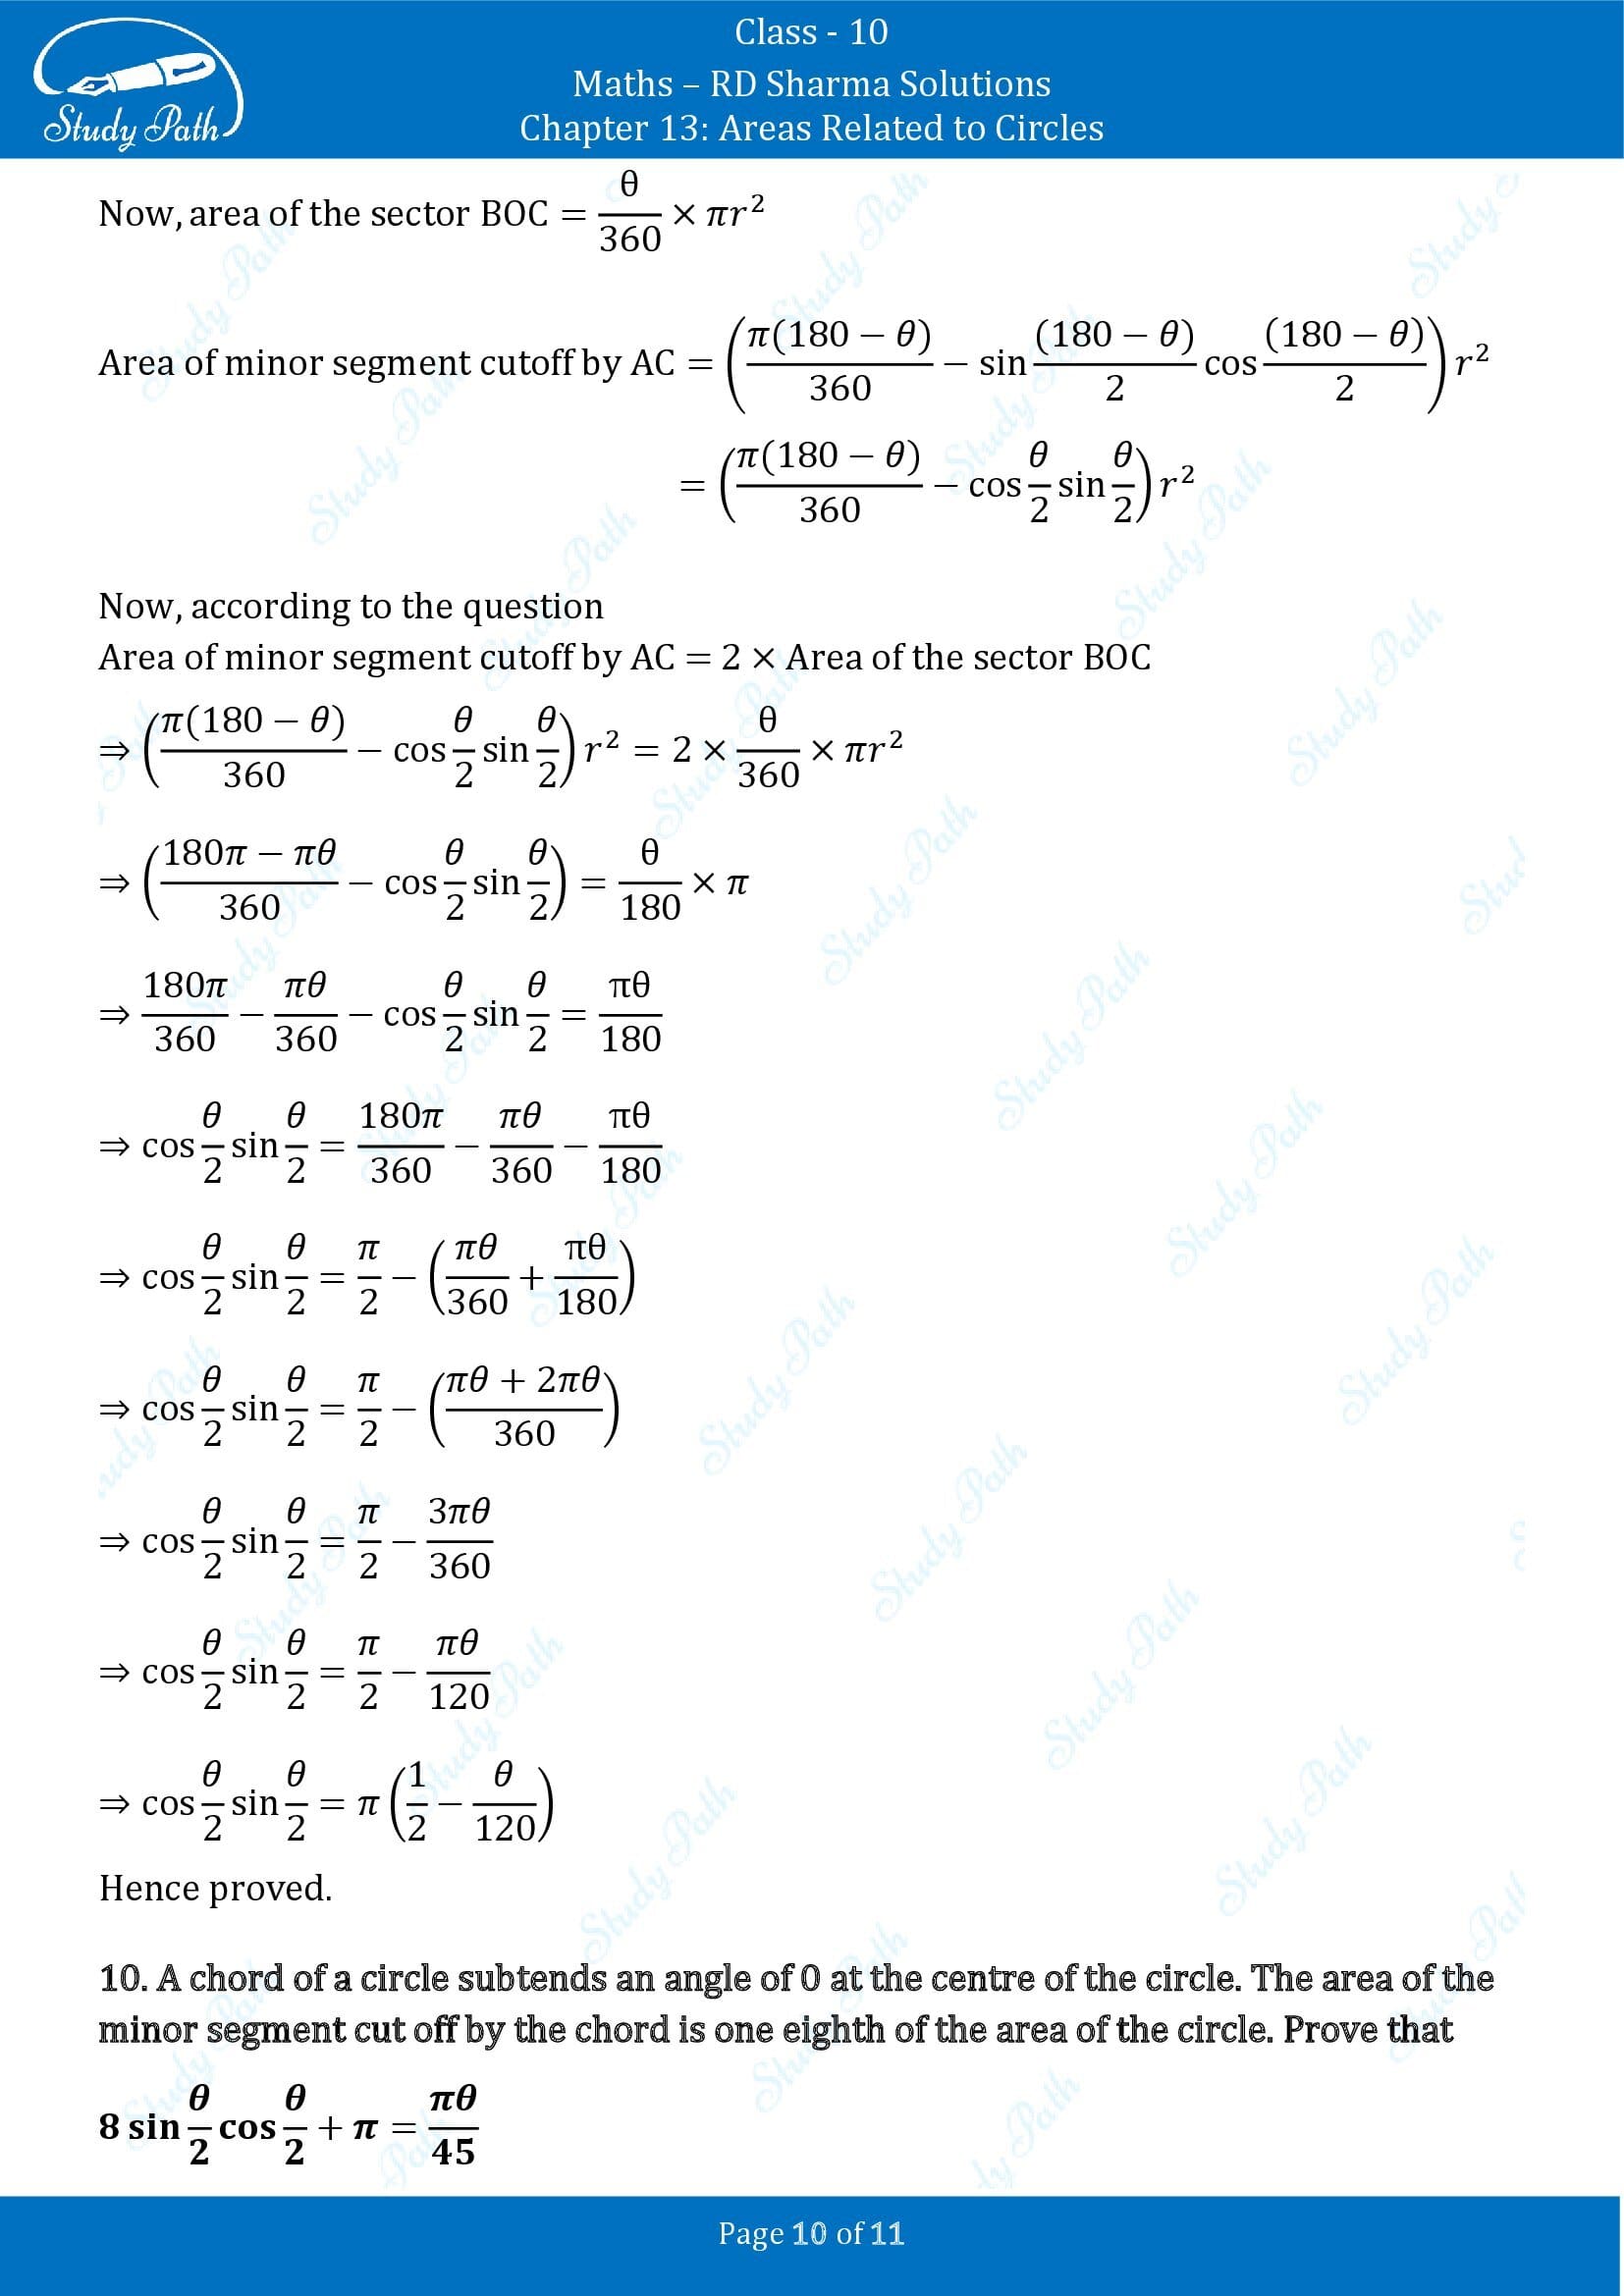 RD Sharma Solutions Class 10 Chapter 13 Areas Related to Circles Exercise 13.3 00010